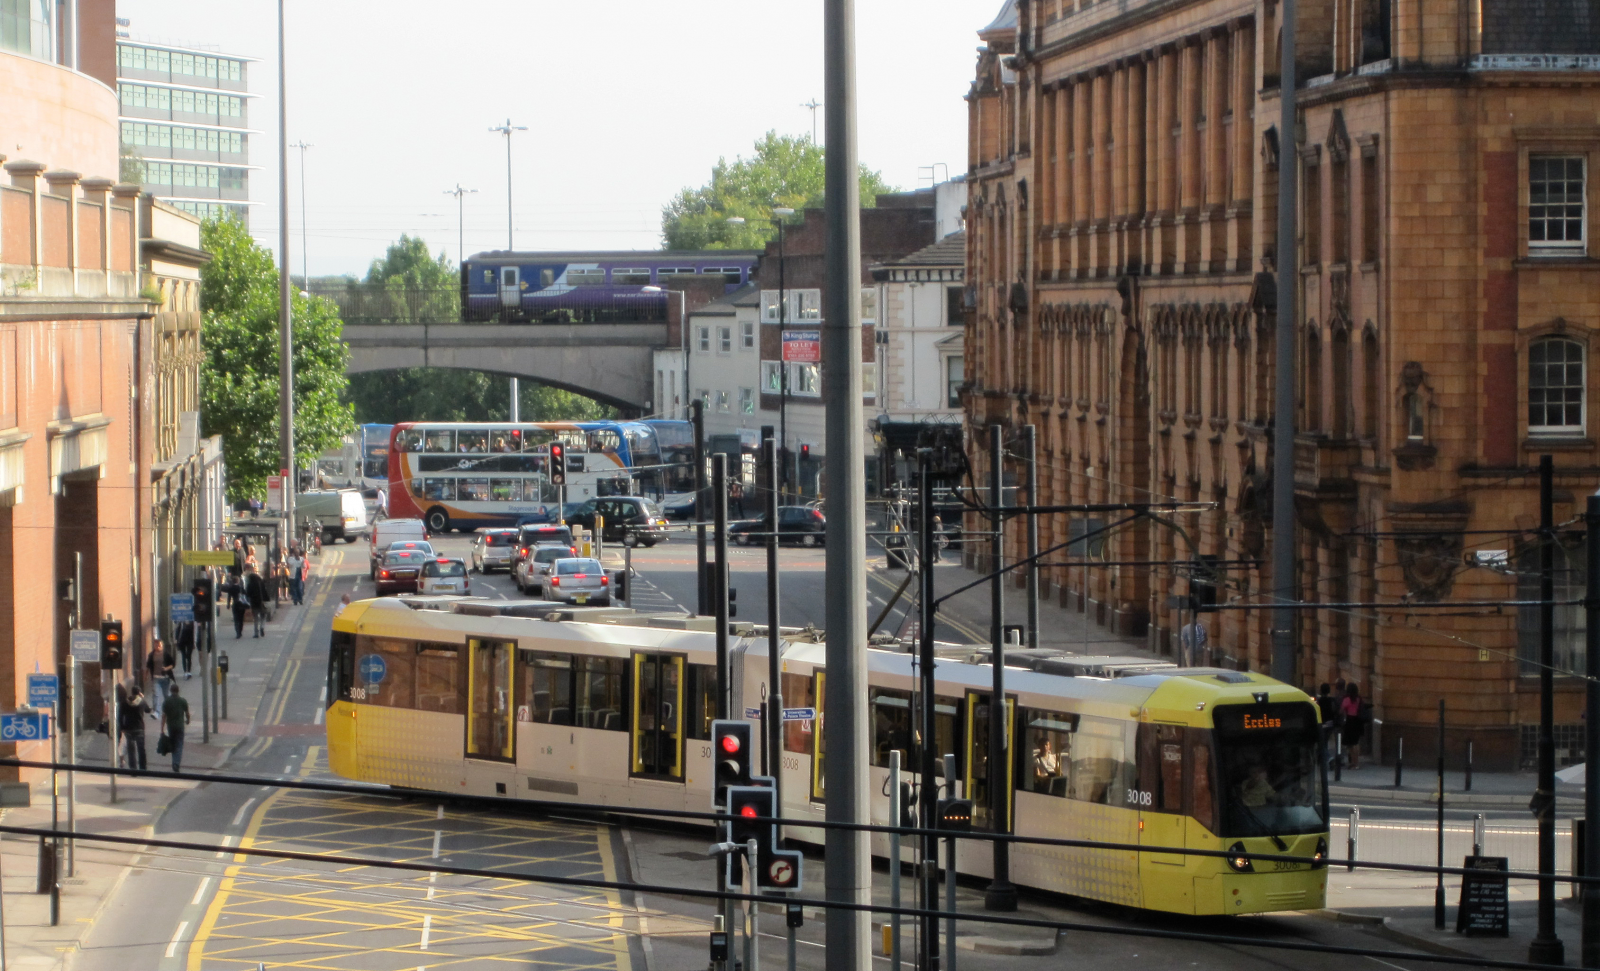 Tram, bus and train in Manchester